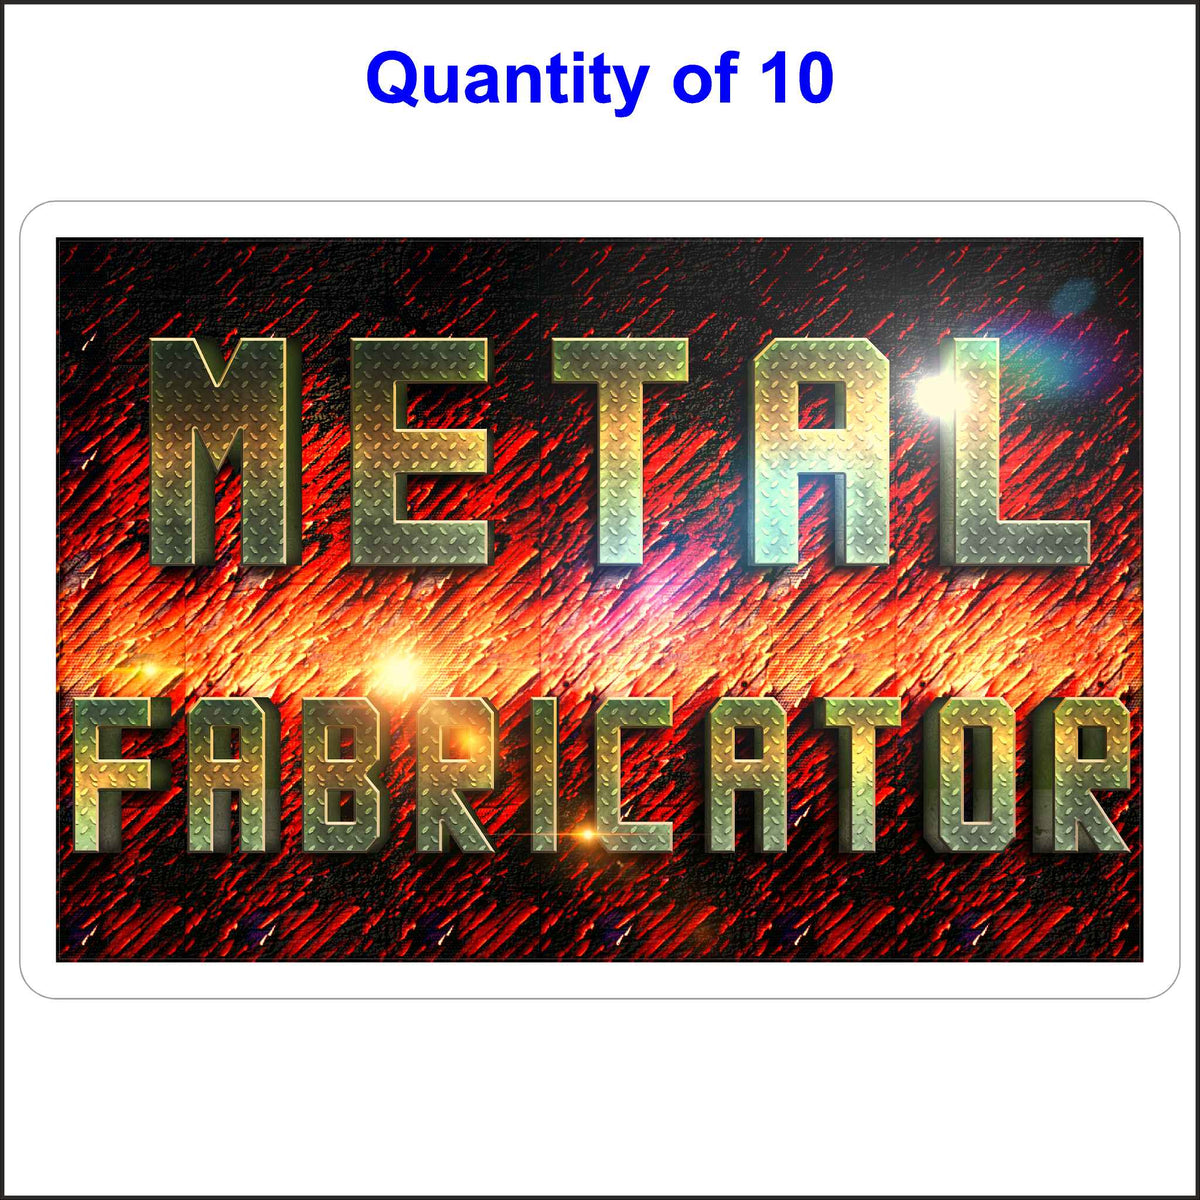 10 Quantity of This Metal Fabricator Sticker. Printed in Full Color and Shows the Text on a Diamond Plate and the Background in Colorful Etched Metal.